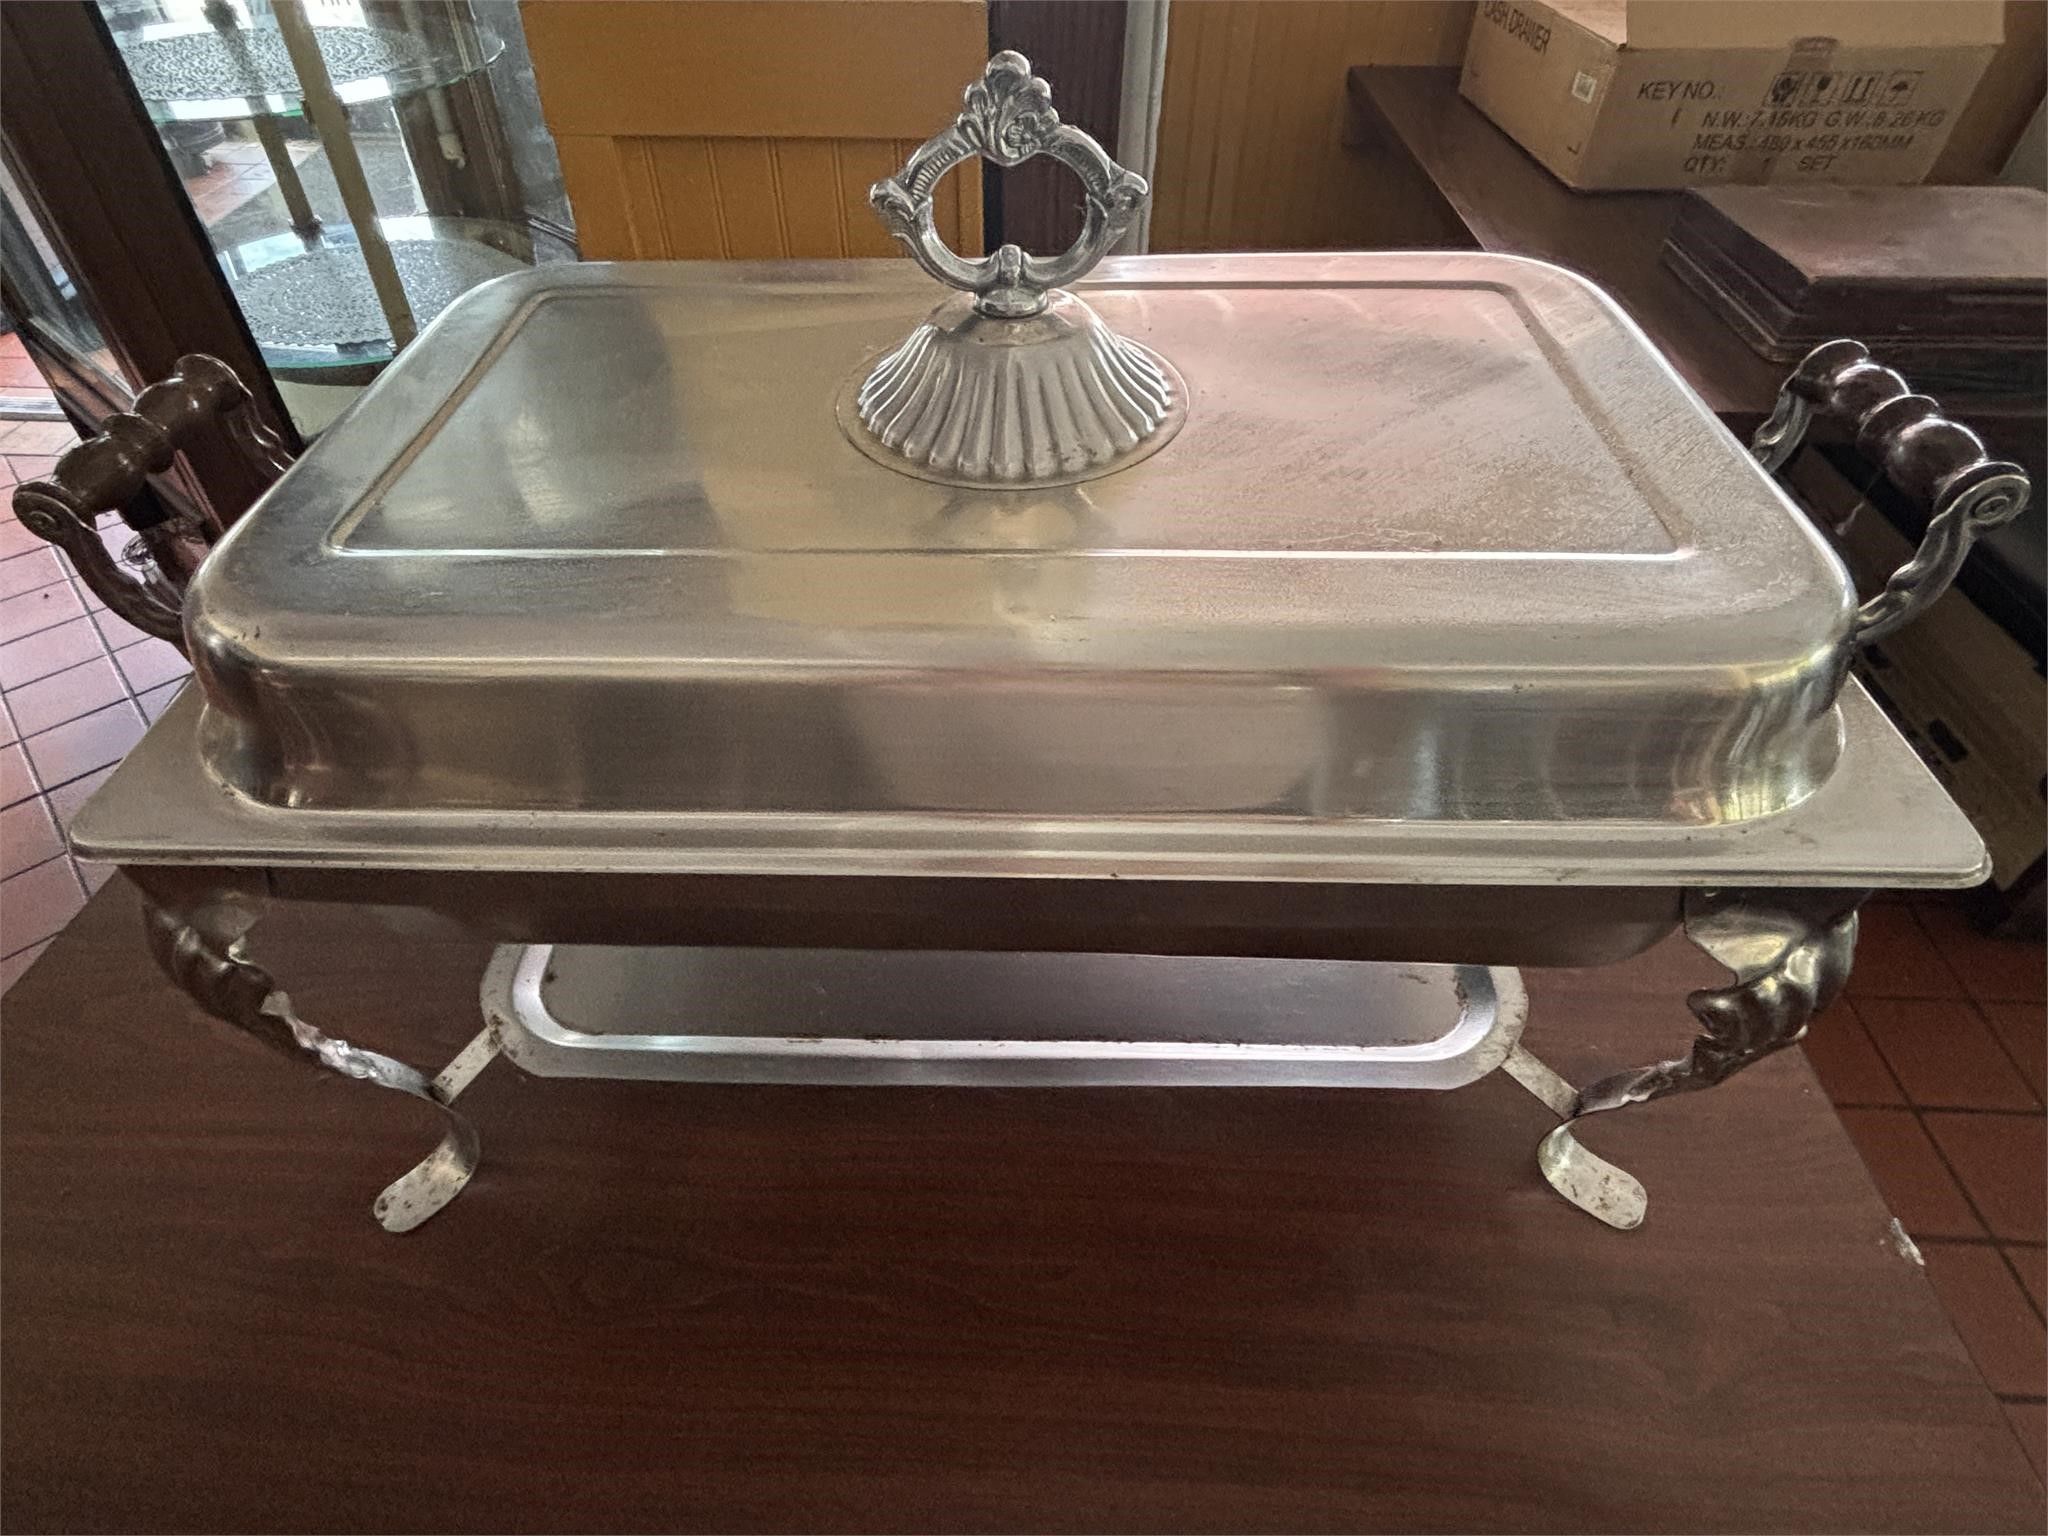 (4) Antique Style Full Size Pan Chafing Dish